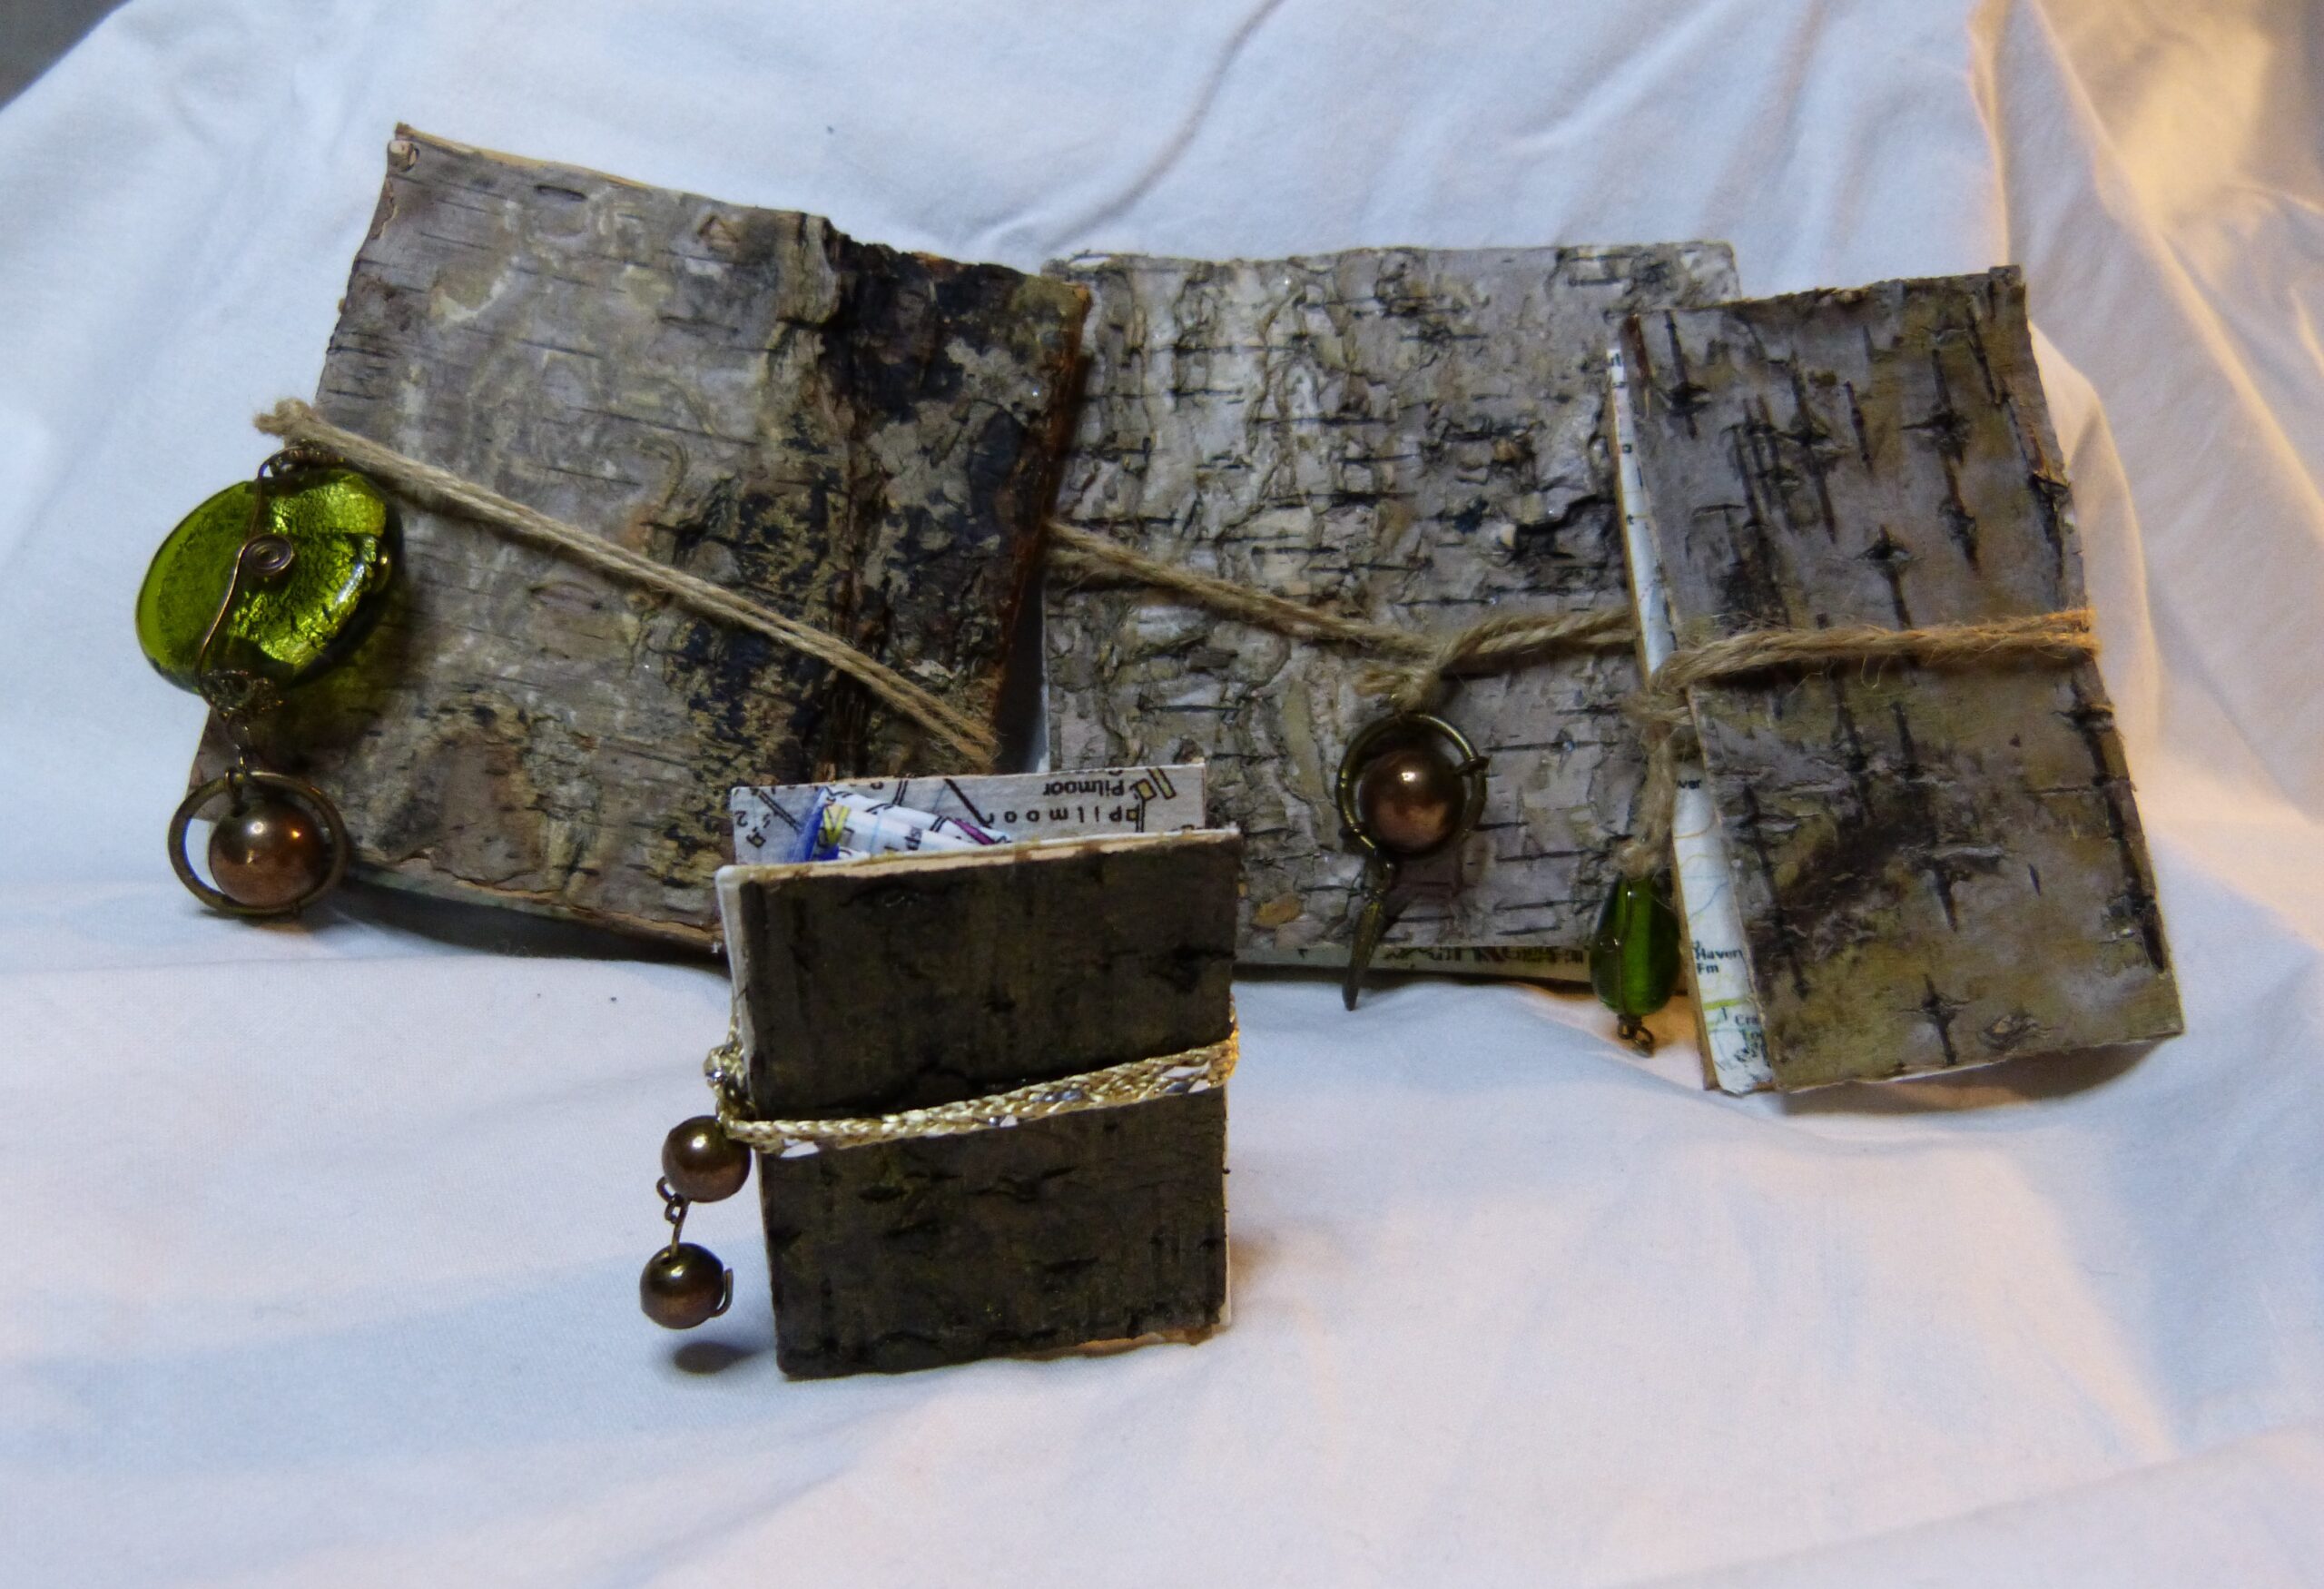 Four artist books with rough birch wood covers, secured with hessian string which has beads attached to the ends